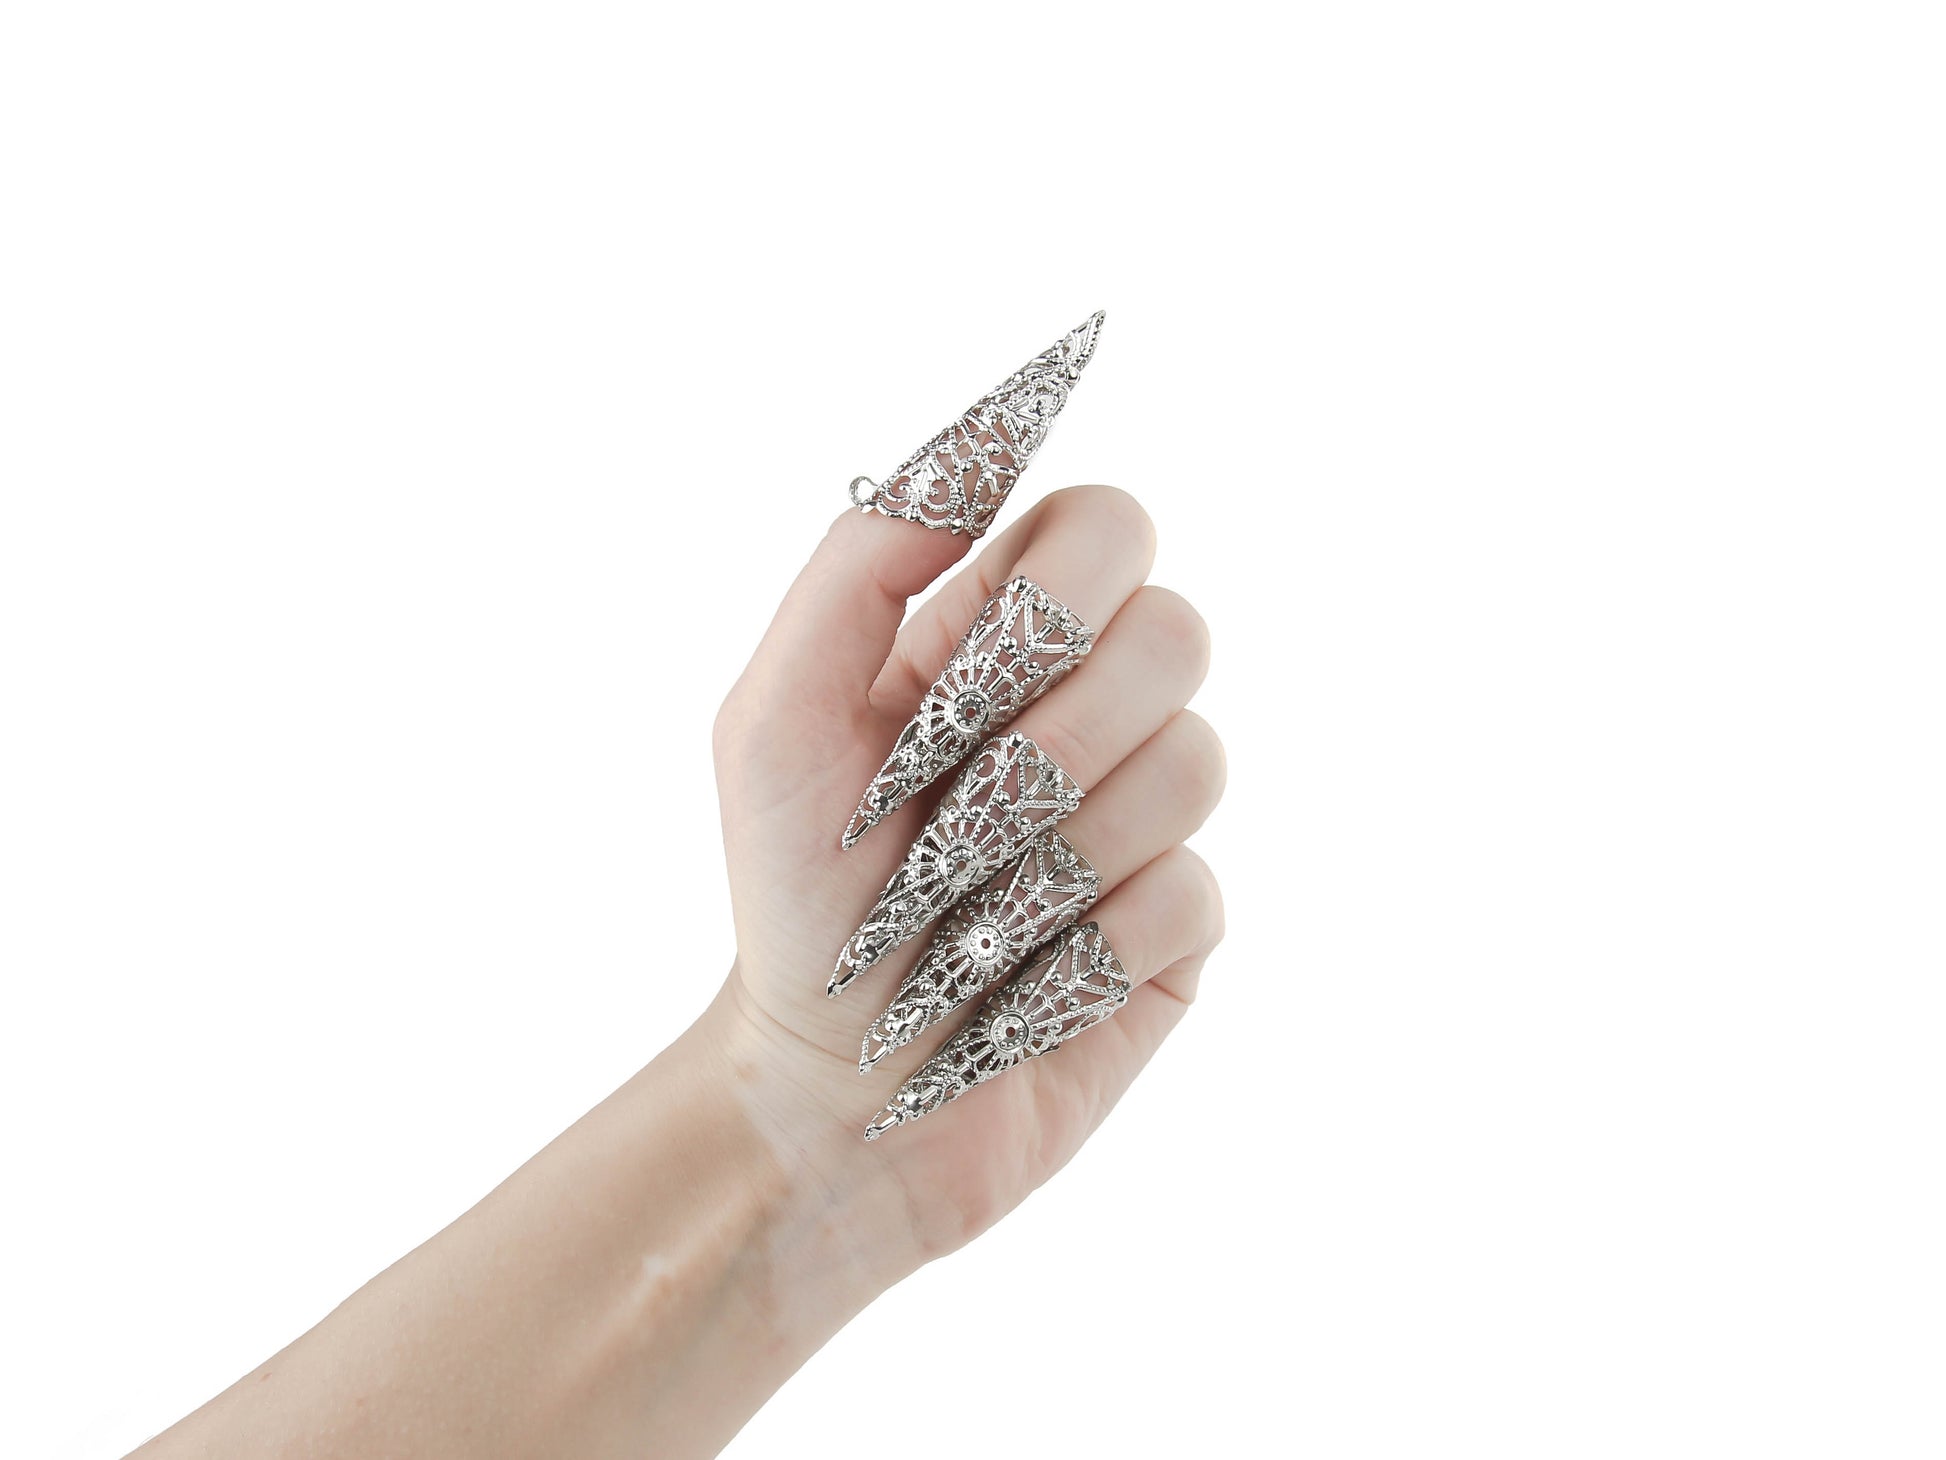  A hand models a full set of Myril Jewels nail claw jewelry, each piece detailed with an ornate silver filigree design that captures the brand’s signature neo-goth style. These claws are perfect for those seeking dark-avantgarde accessories, making a dramatic statement for Halloween, embodying the gothic-chic and whimsigoth aesthetic. They are also ideal for adding an edge to everyday minimal goth looks or for complementing witchcore outfits at rave parties and festivals.